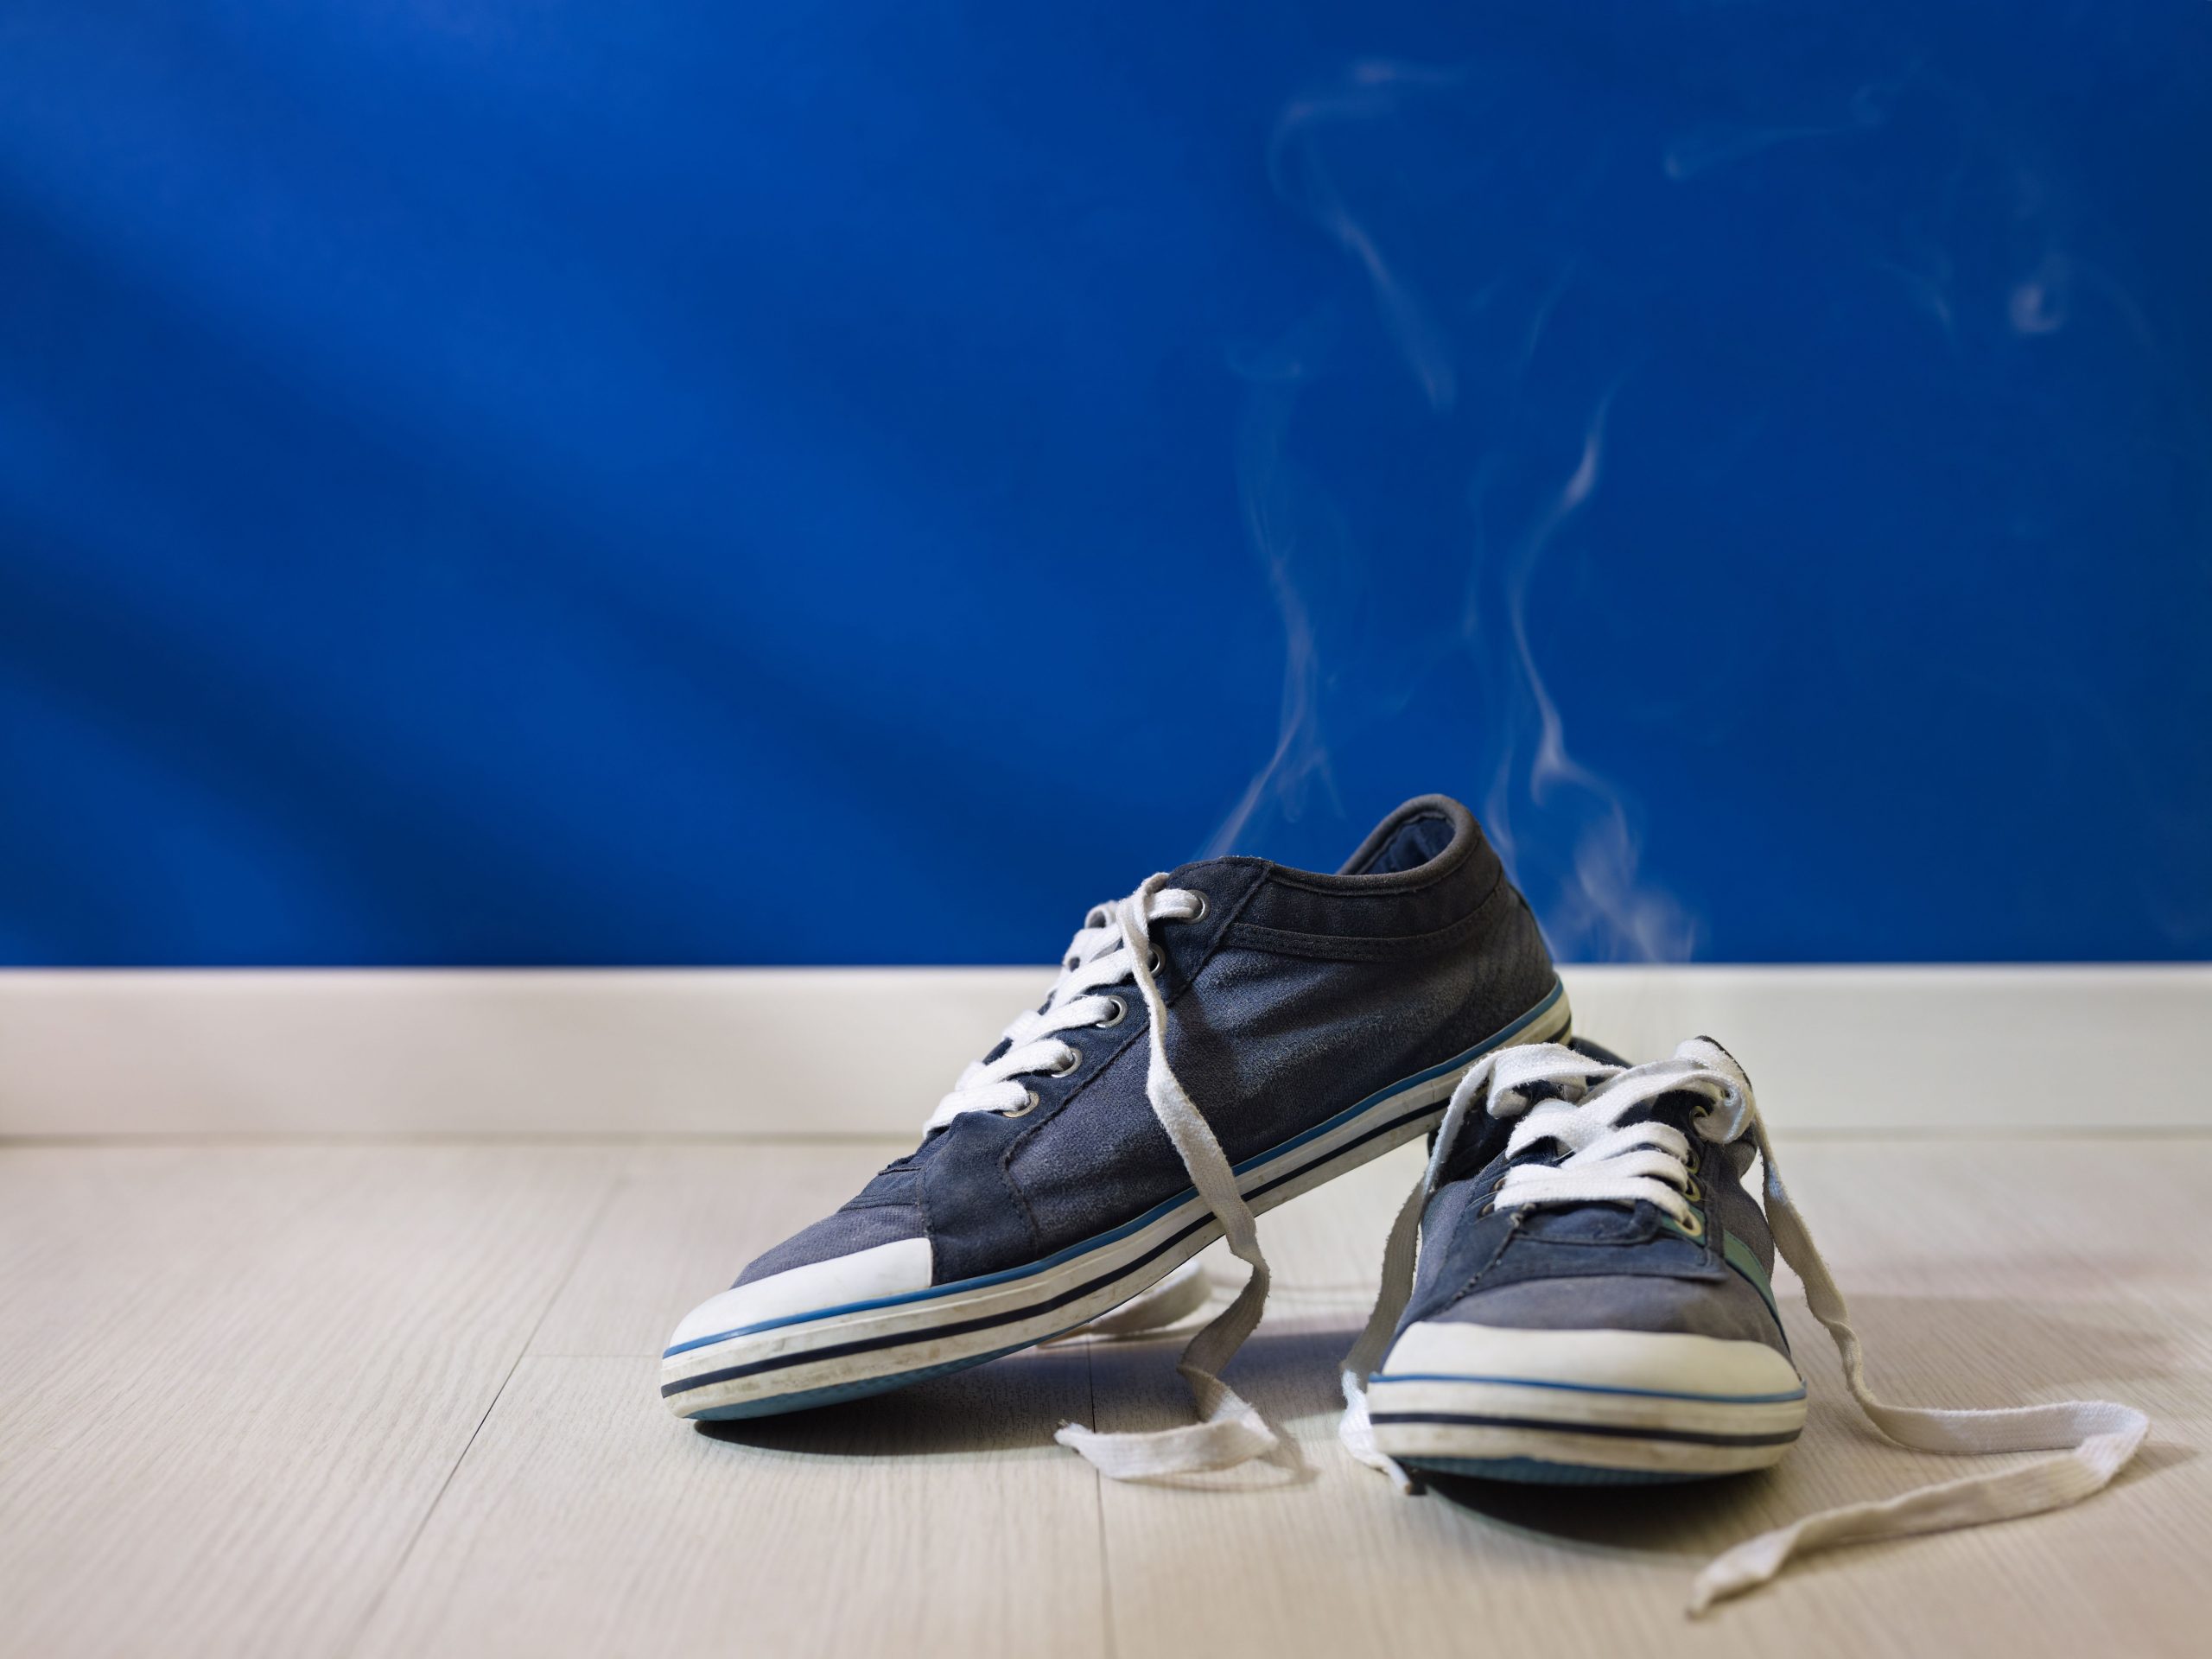 10 tricks to get rid of unpleasant odors in shoes